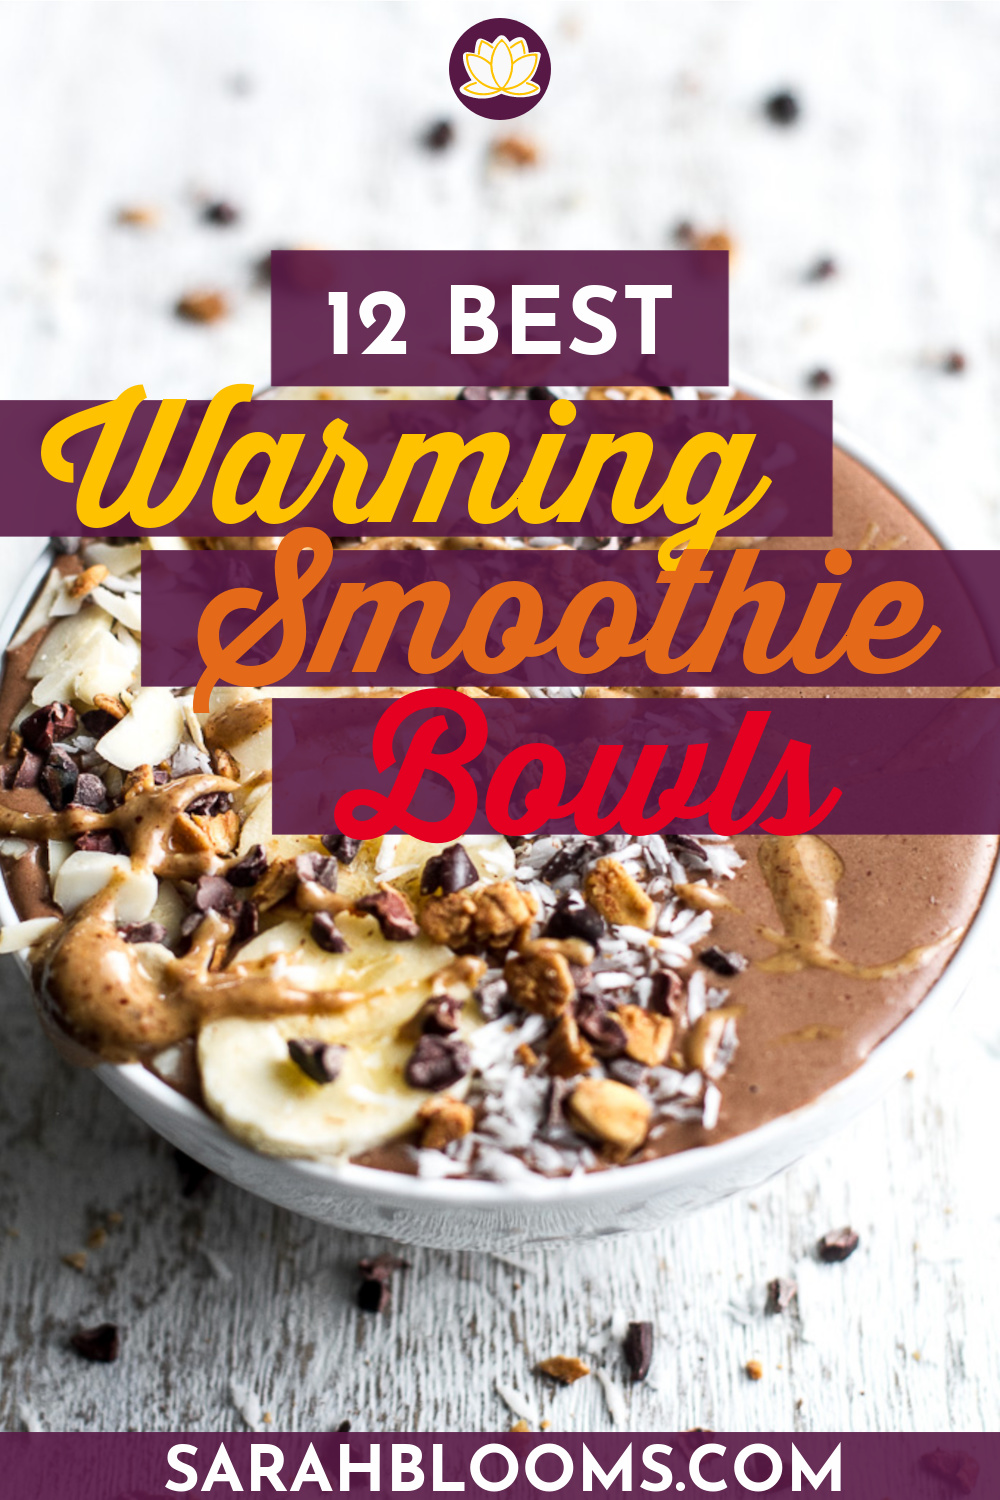 Stay warm this fall and winter with these 12 Best Warming Smoothie Bowls that will help you eat healthy when it's cold outside! #warmingsmoothiebowls #warmsmoothiebowls #warmingsmoothiebowlrecipes #warmingsmoothierecipes #smoothierecipes #fallsmoothies #fallsmoothierecipes #healthyfallrecipes